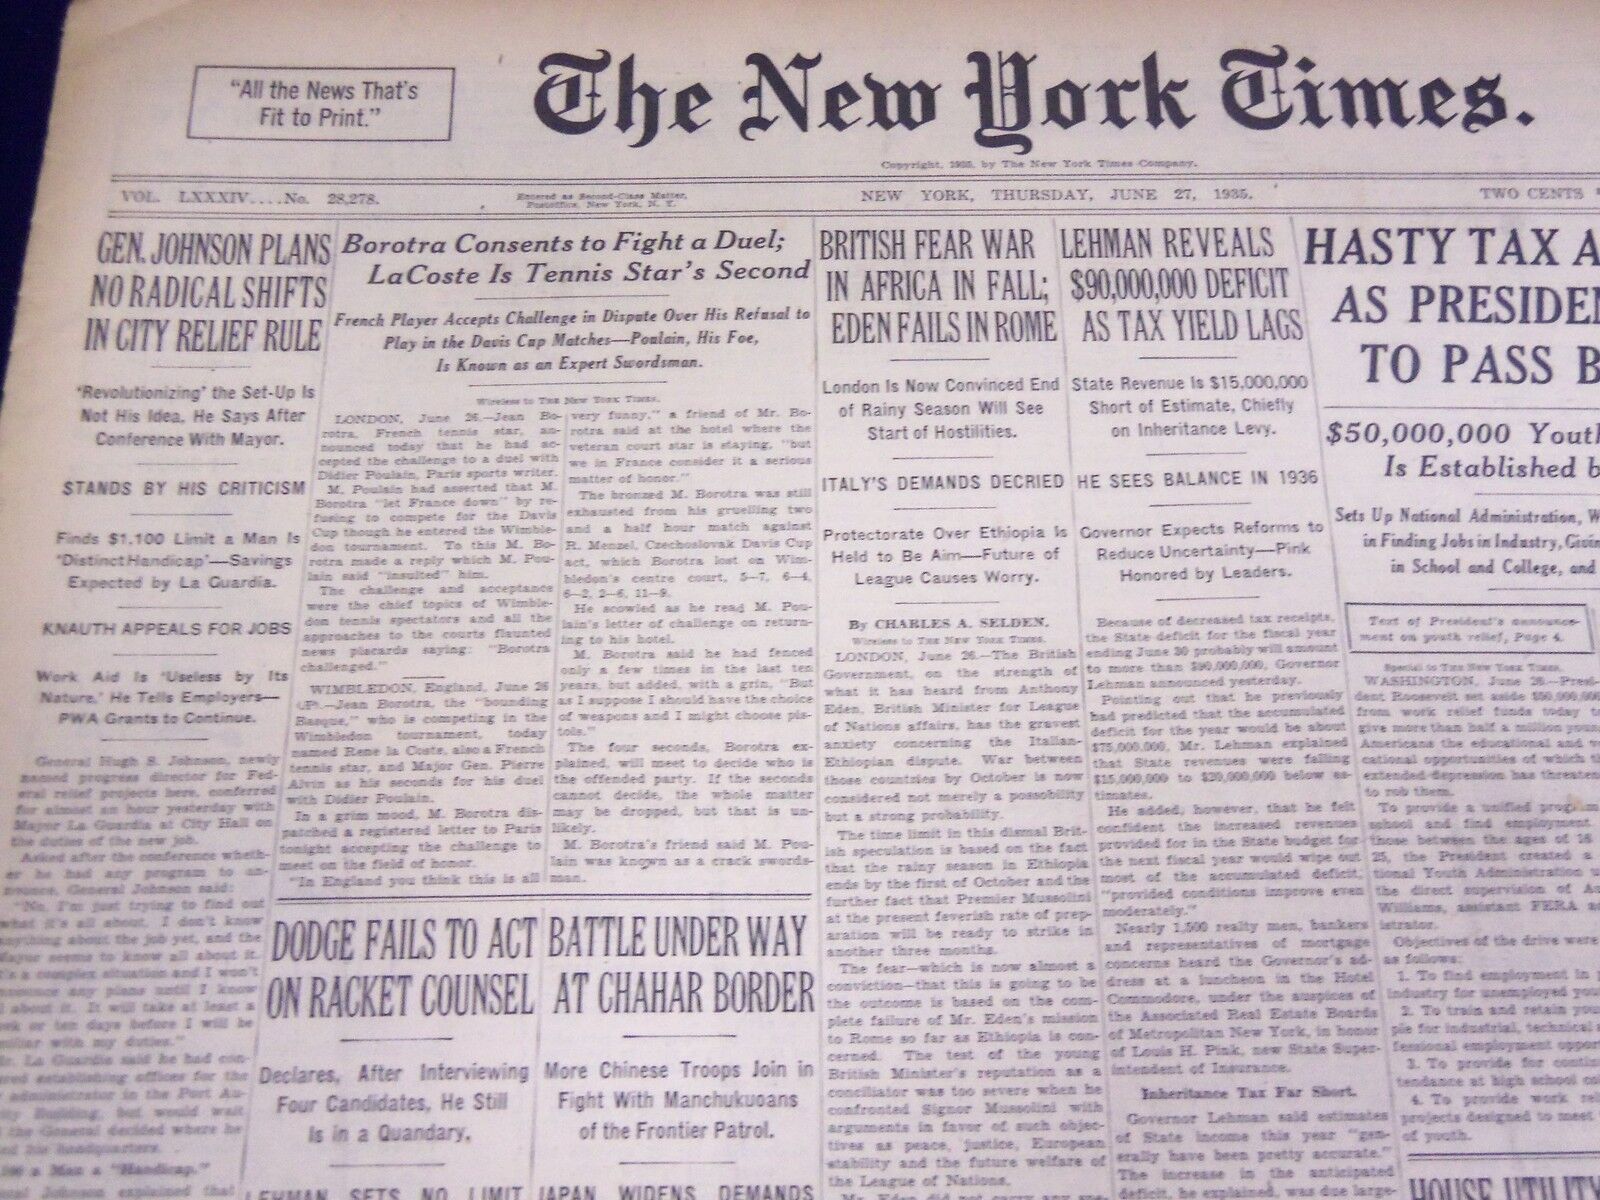 1935 JUNE 27 NEW YORK TIMES - BOROTRA CONSENTS TO DUEL - NT 3815